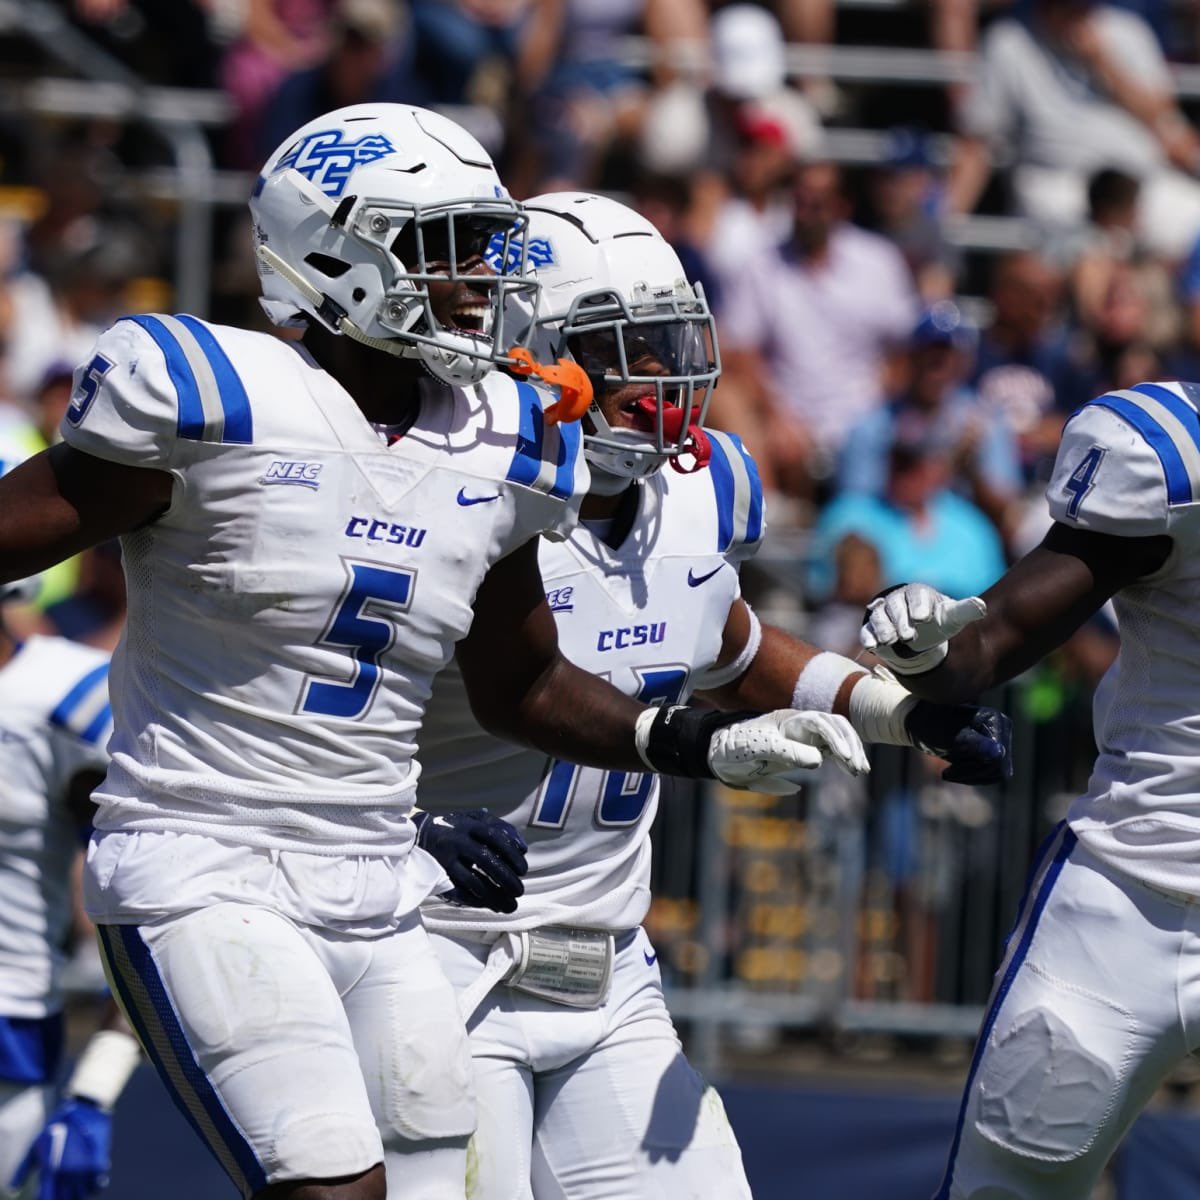 #AGTG Blessed to receive an division 1 offer from Central Connecticut State University! @CCSUfootball